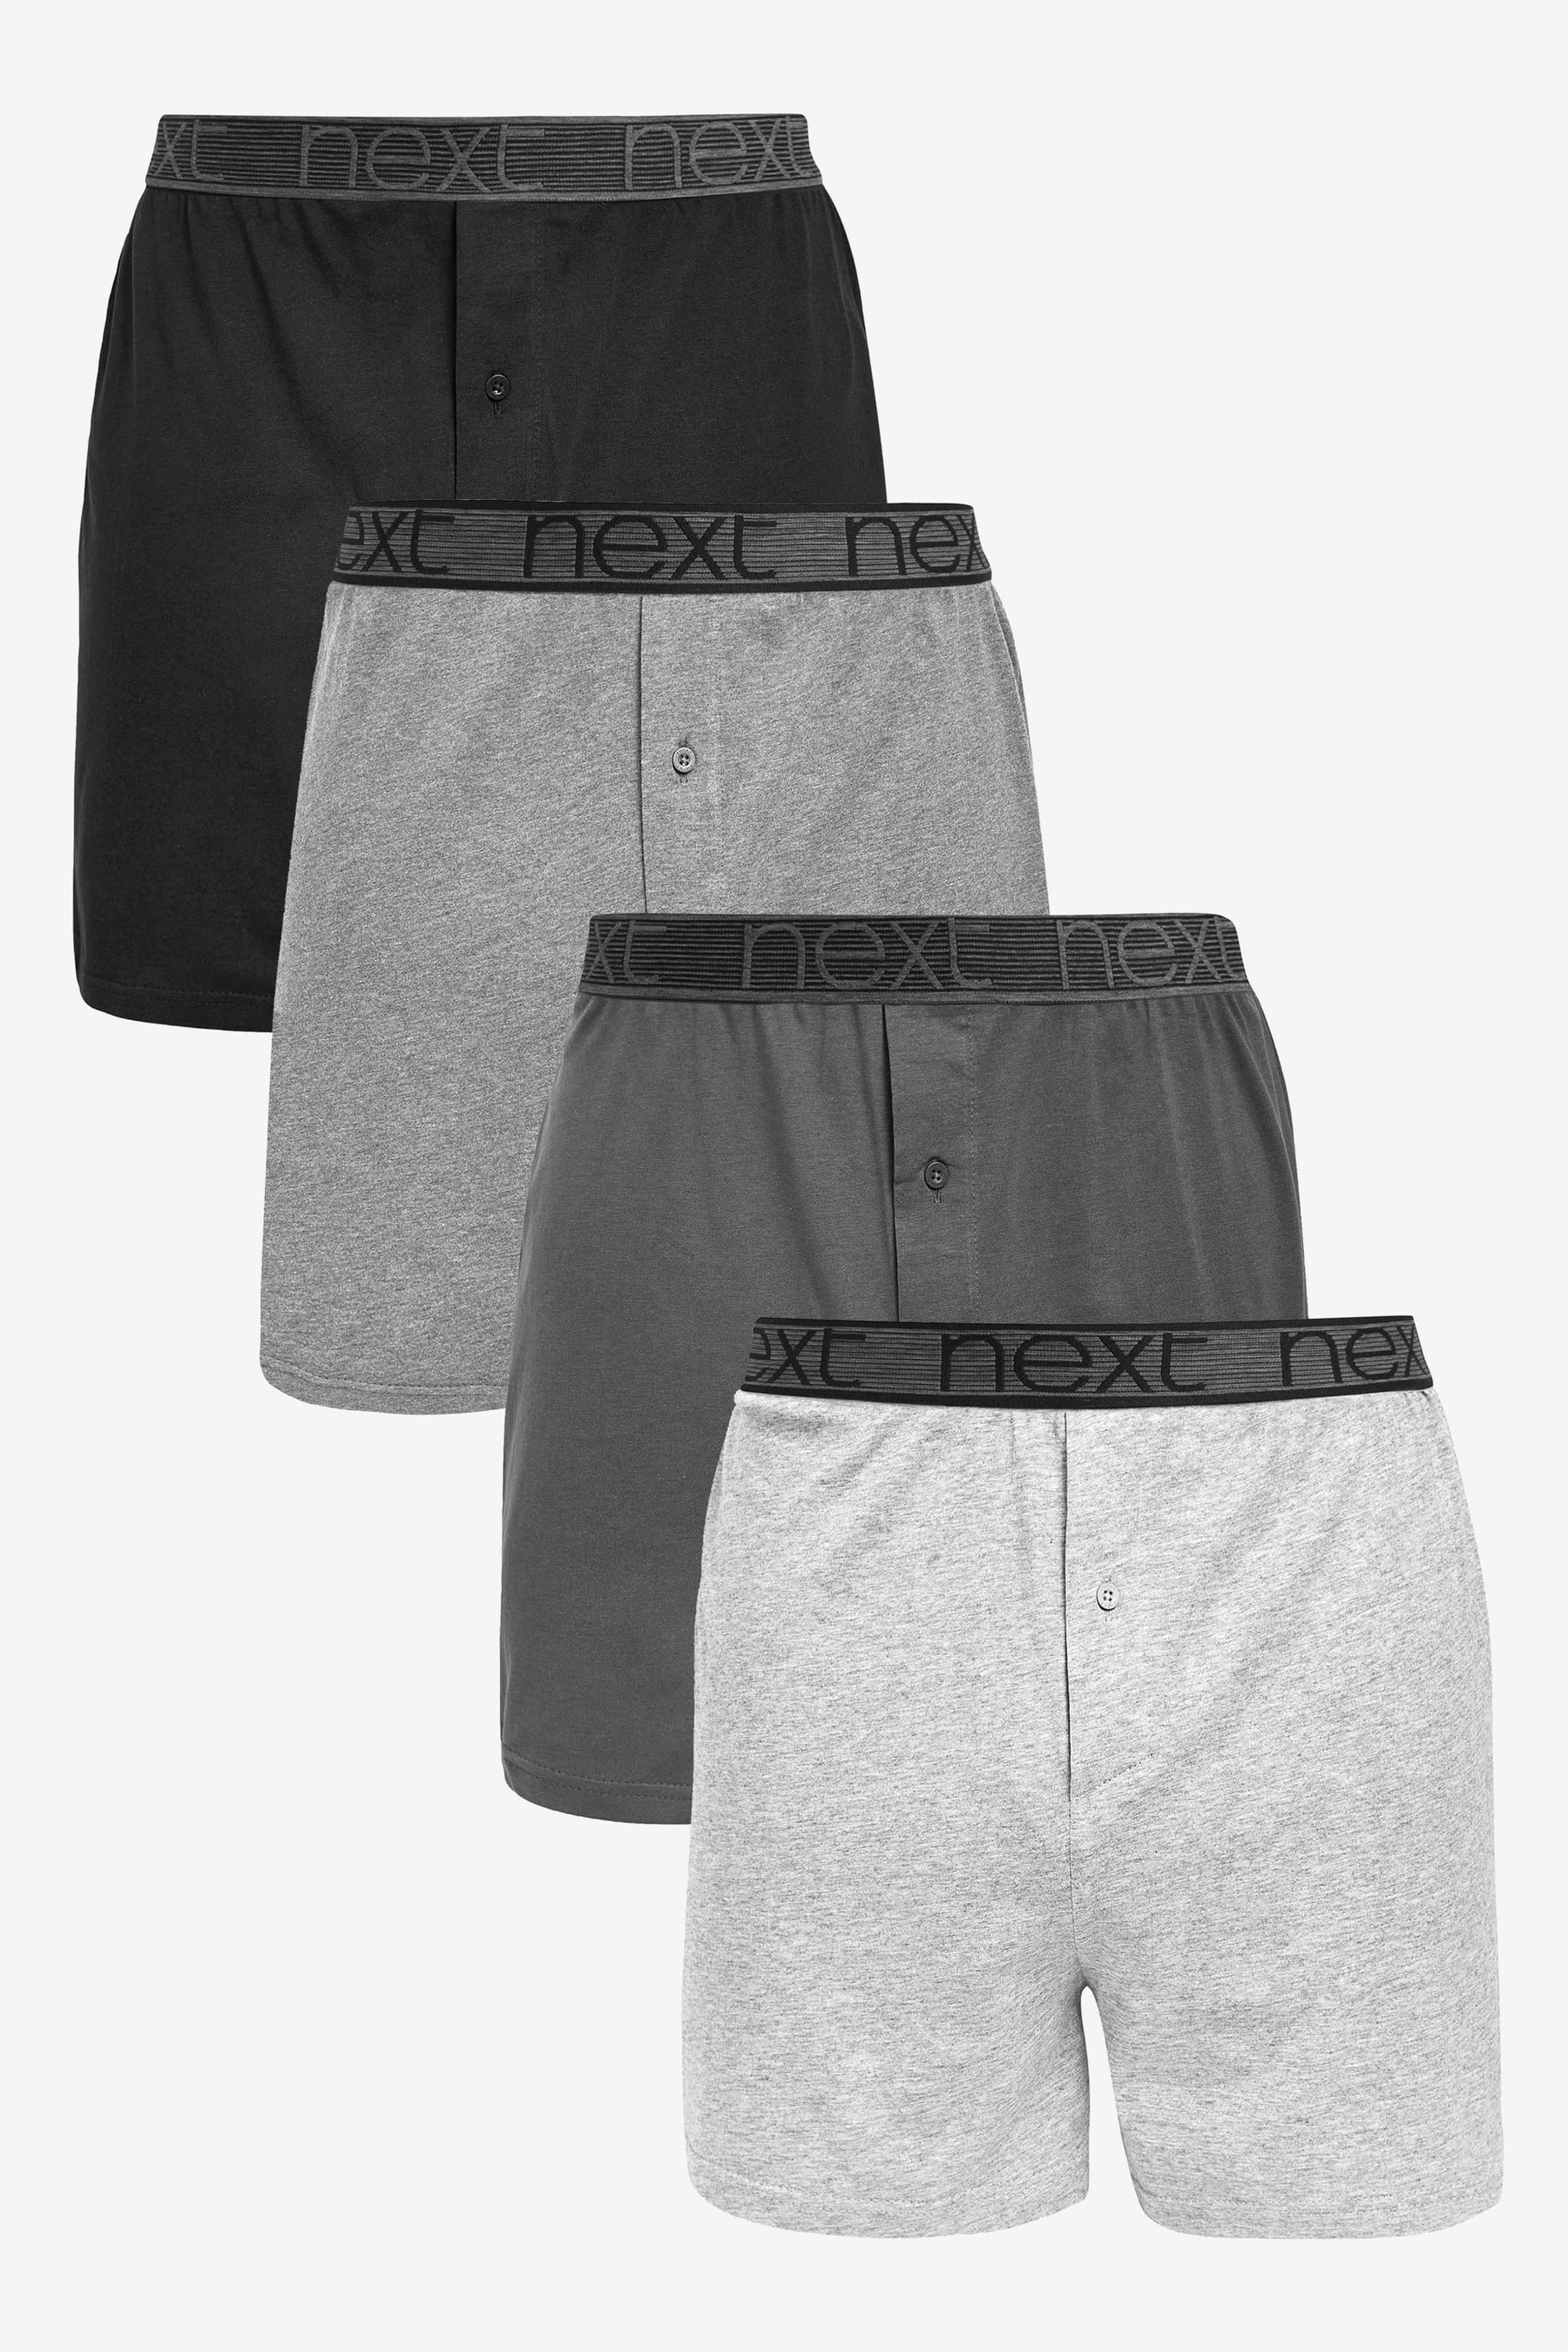 Buy Loose Fit Pure Cotton Boxers from the Next UK online shop